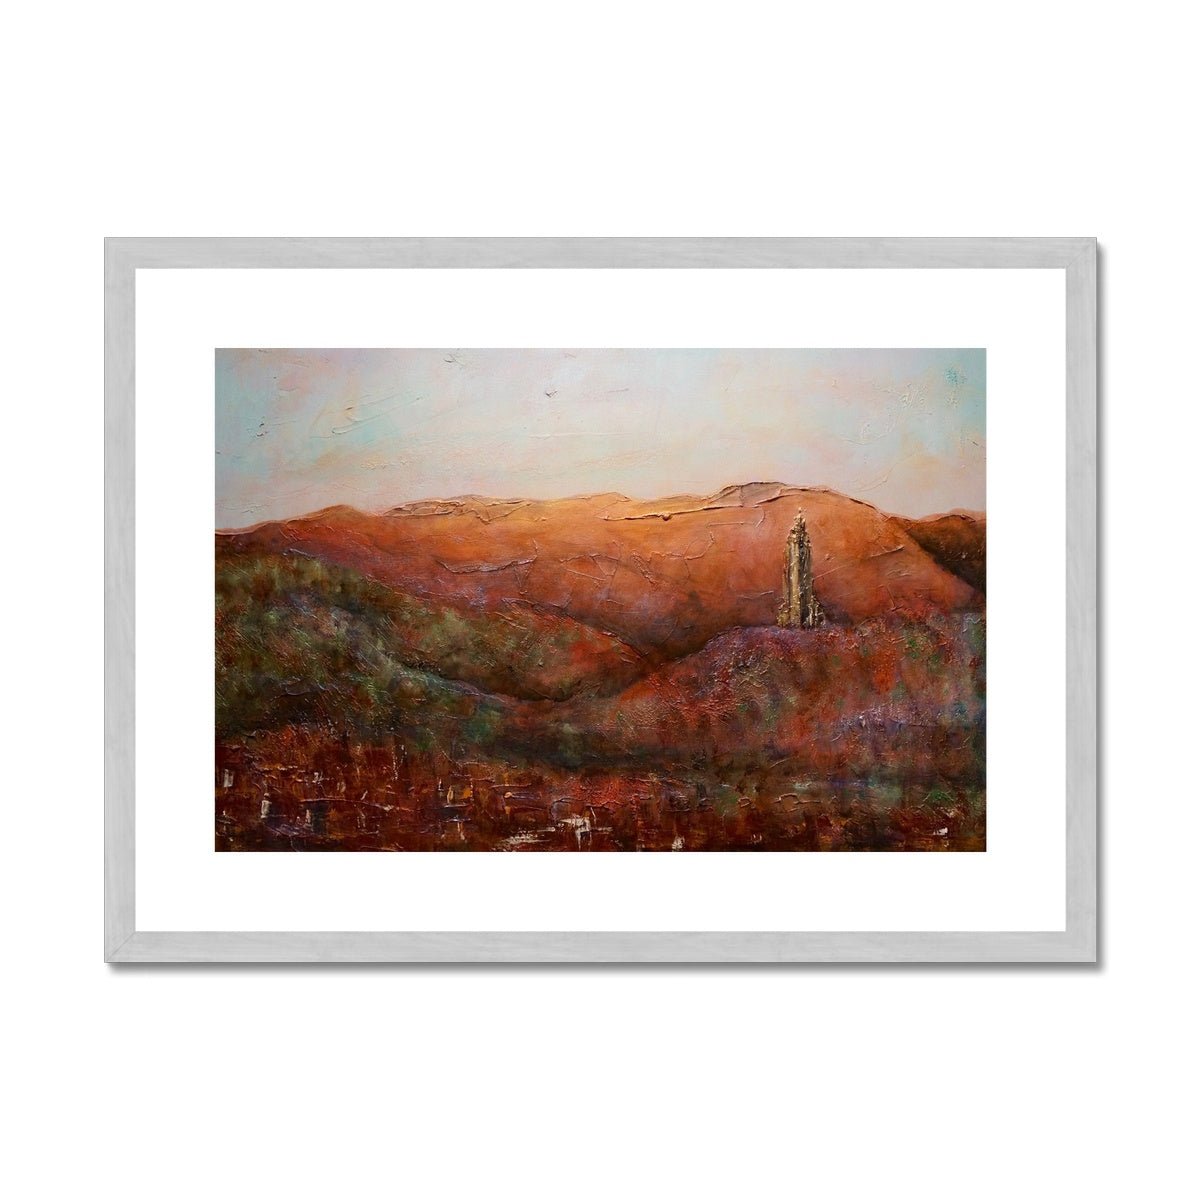 The Wallace Monument Painting | Antique Framed & Mounted Prints From Scotland-Antique Framed & Mounted Prints-Historic & Iconic Scotland Art Gallery-A2 Landscape-Silver Frame-Paintings, Prints, Homeware, Art Gifts From Scotland By Scottish Artist Kevin Hunter